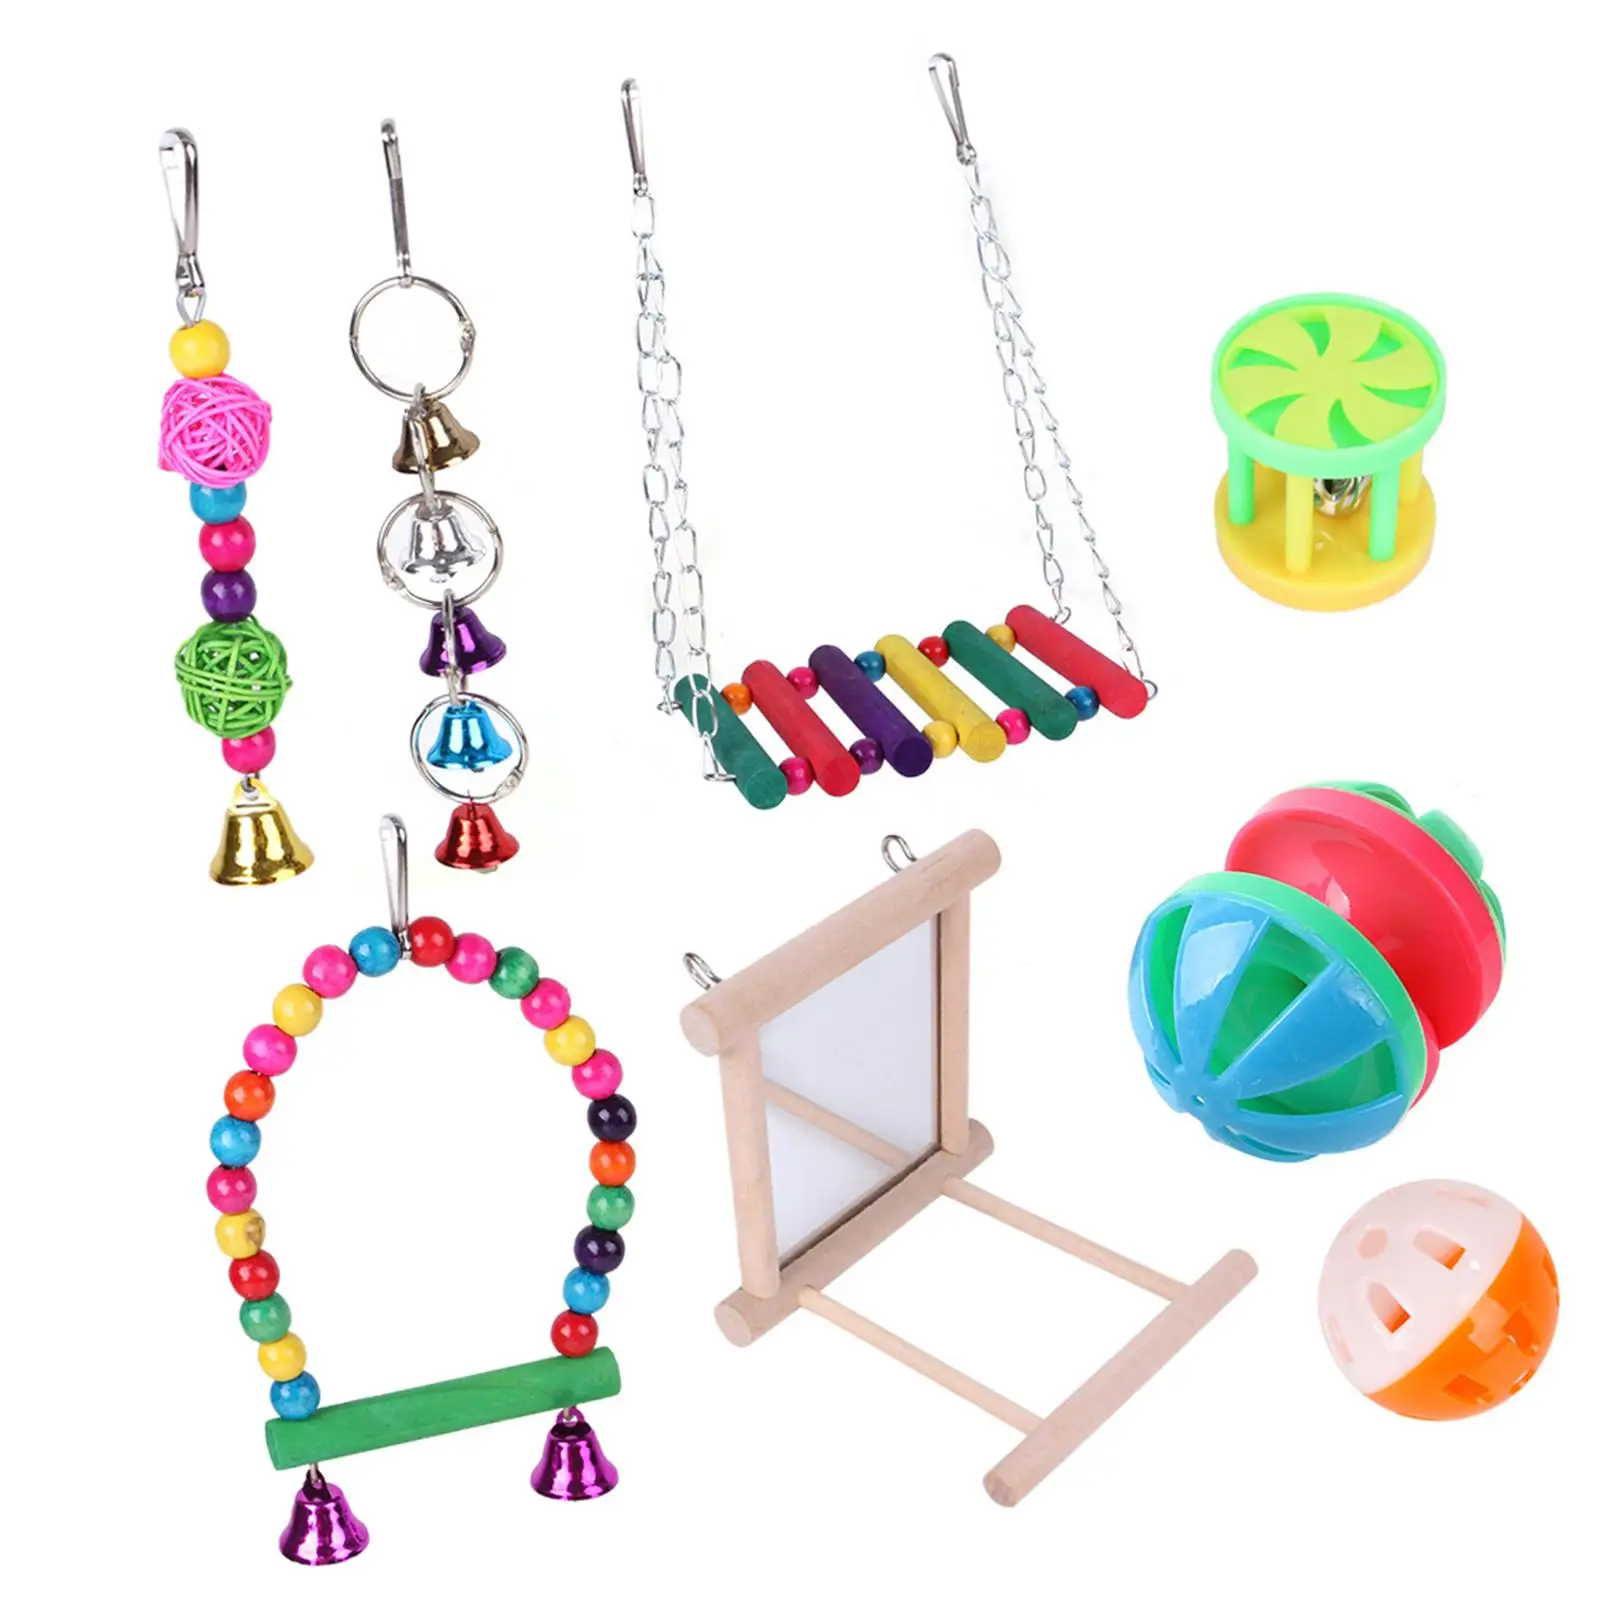 

8Pcs Parrot Toys kit Supplies Training Climbing Bird Swing Toy Chewing Toys for Cockatoos Budgies Macaws Parakeets Cockatiels